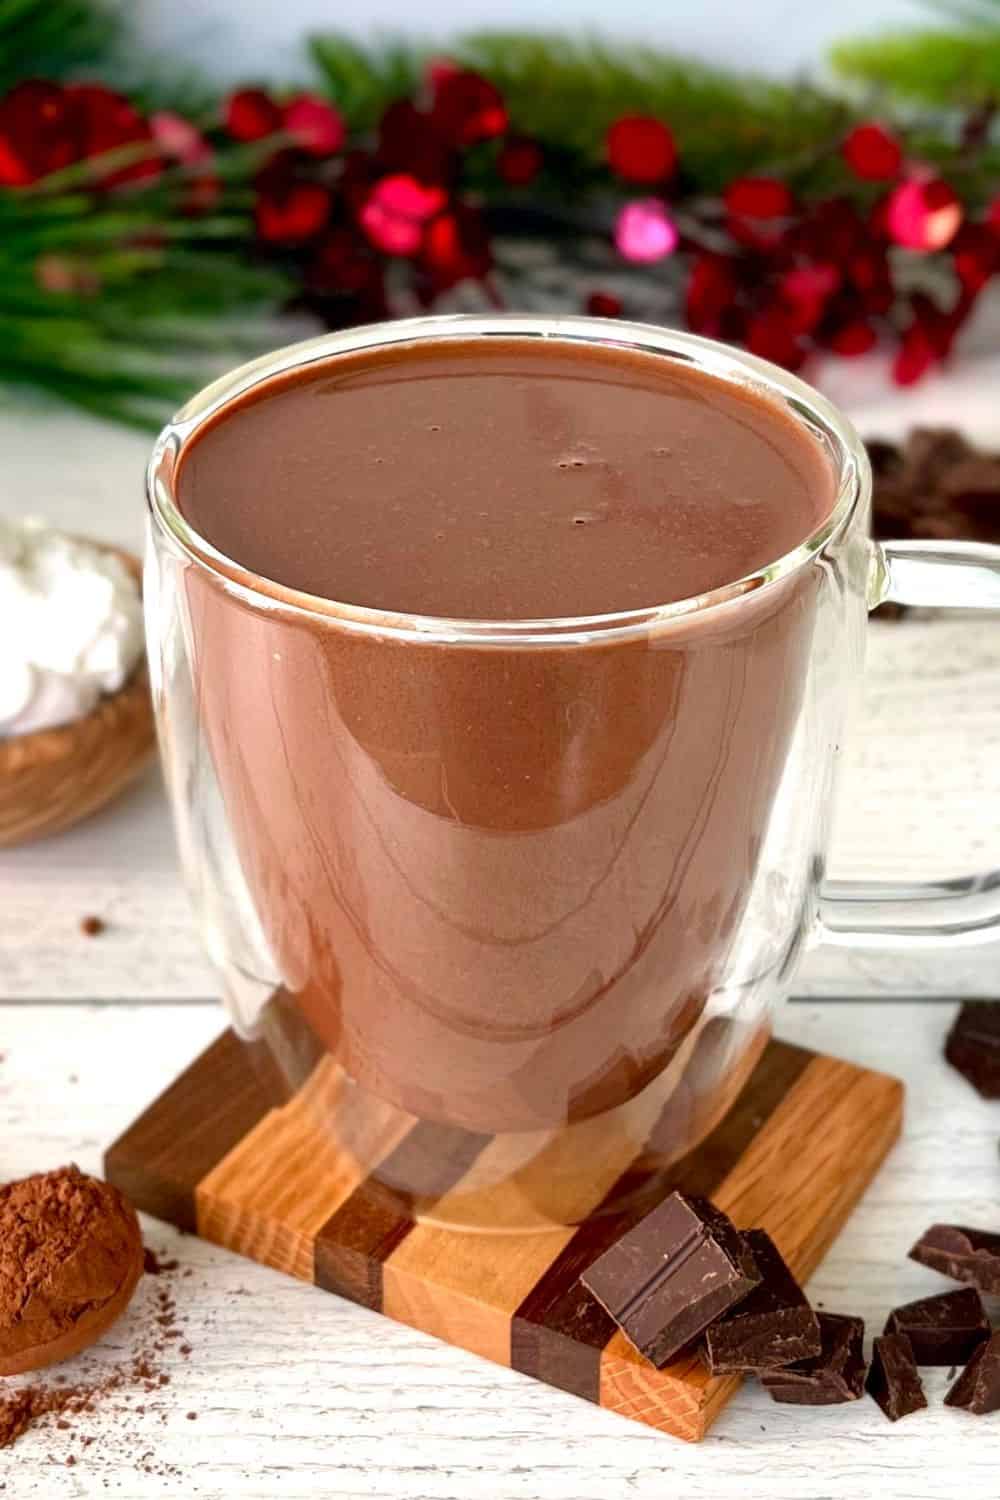 Healthy hot chocolate in a glass mug surrounded by garland, cocoa powder and chopped chocolate.